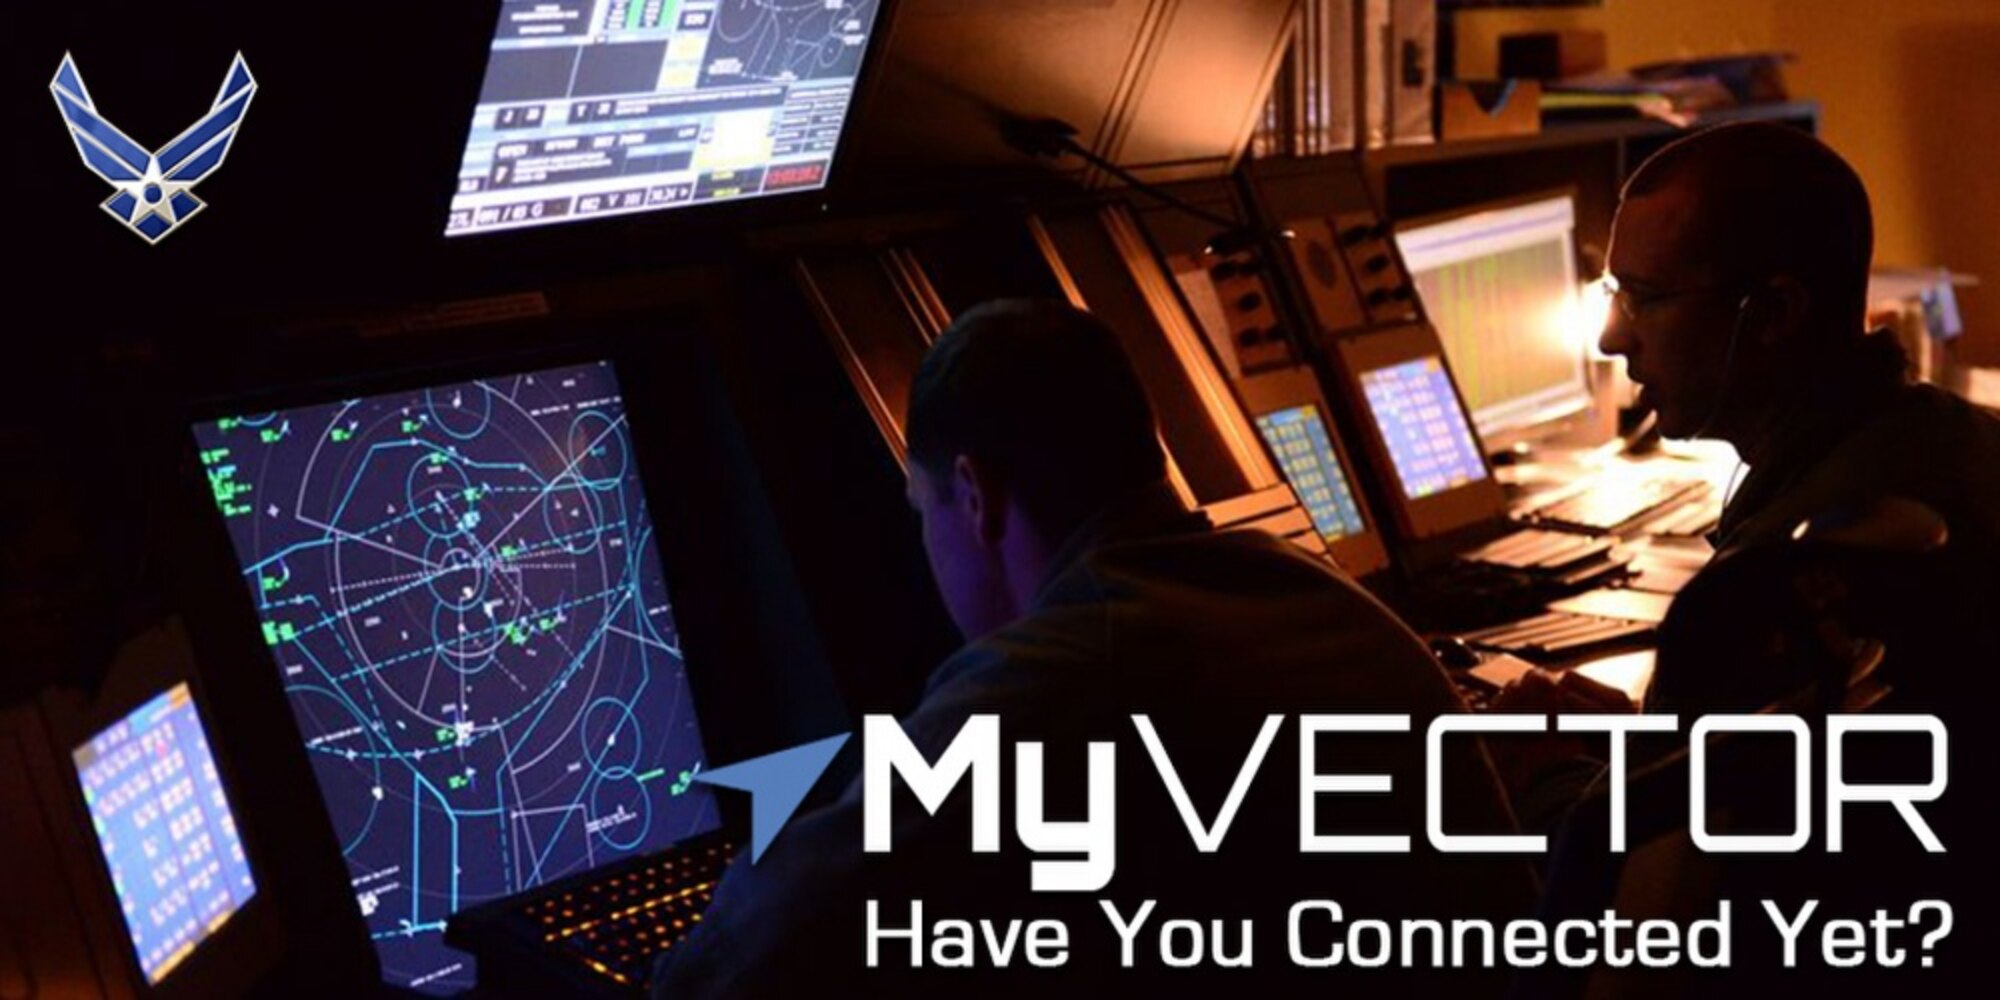 Total Force officer, enlisted and civilian personnel now have the ability to input their joint experiences within the MyVector platform, allowing members to, more effectively, report joint experiences when being selected for future development and assignments by commanders.